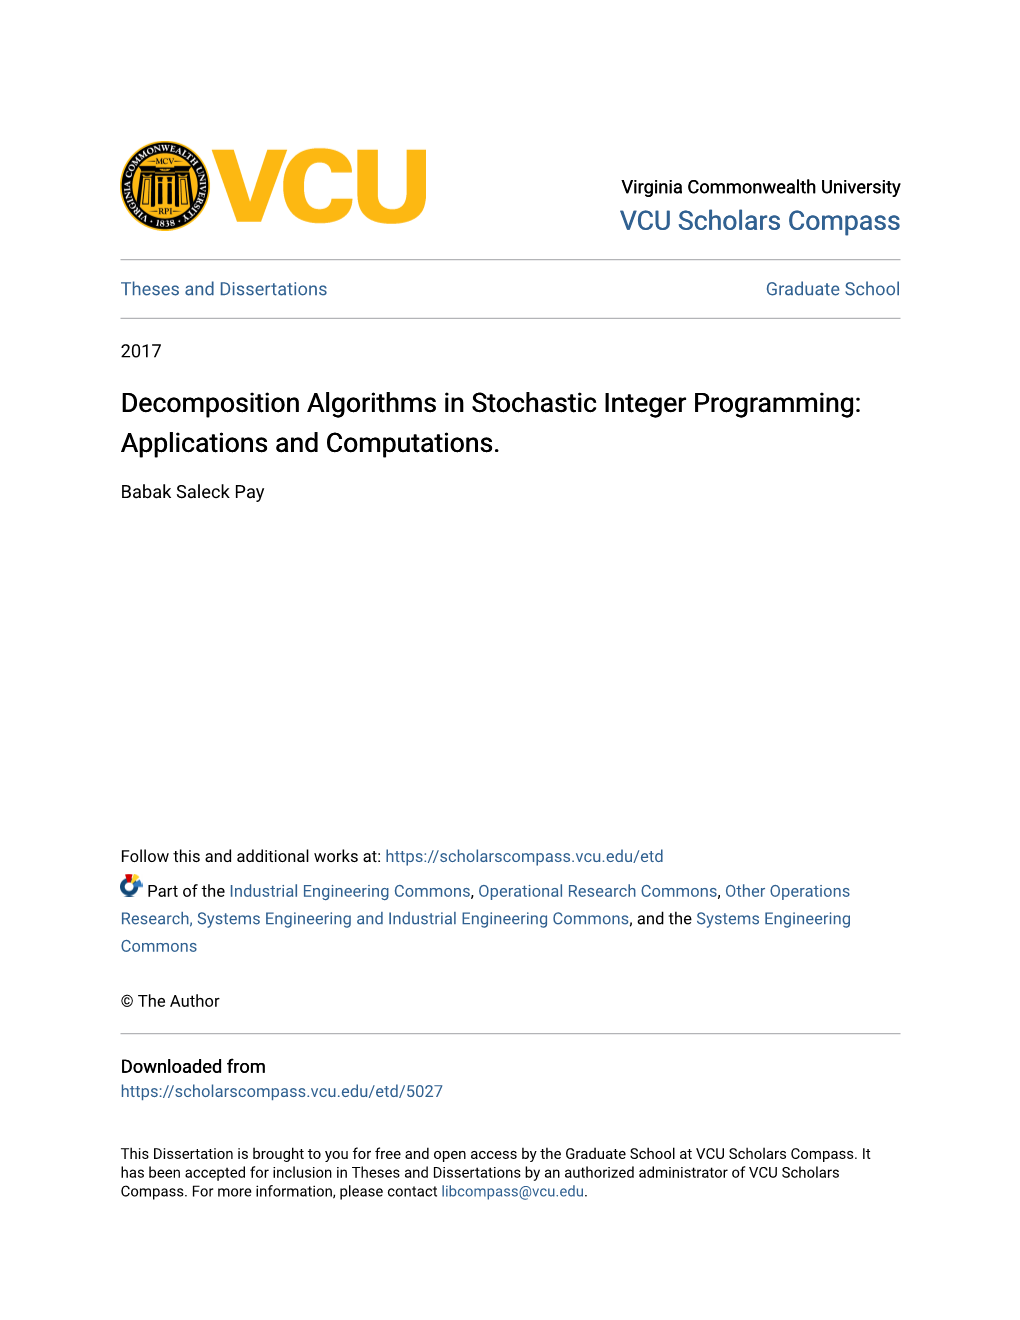 Decomposition Algorithms in Stochastic Integer Programming: Applications and Computations